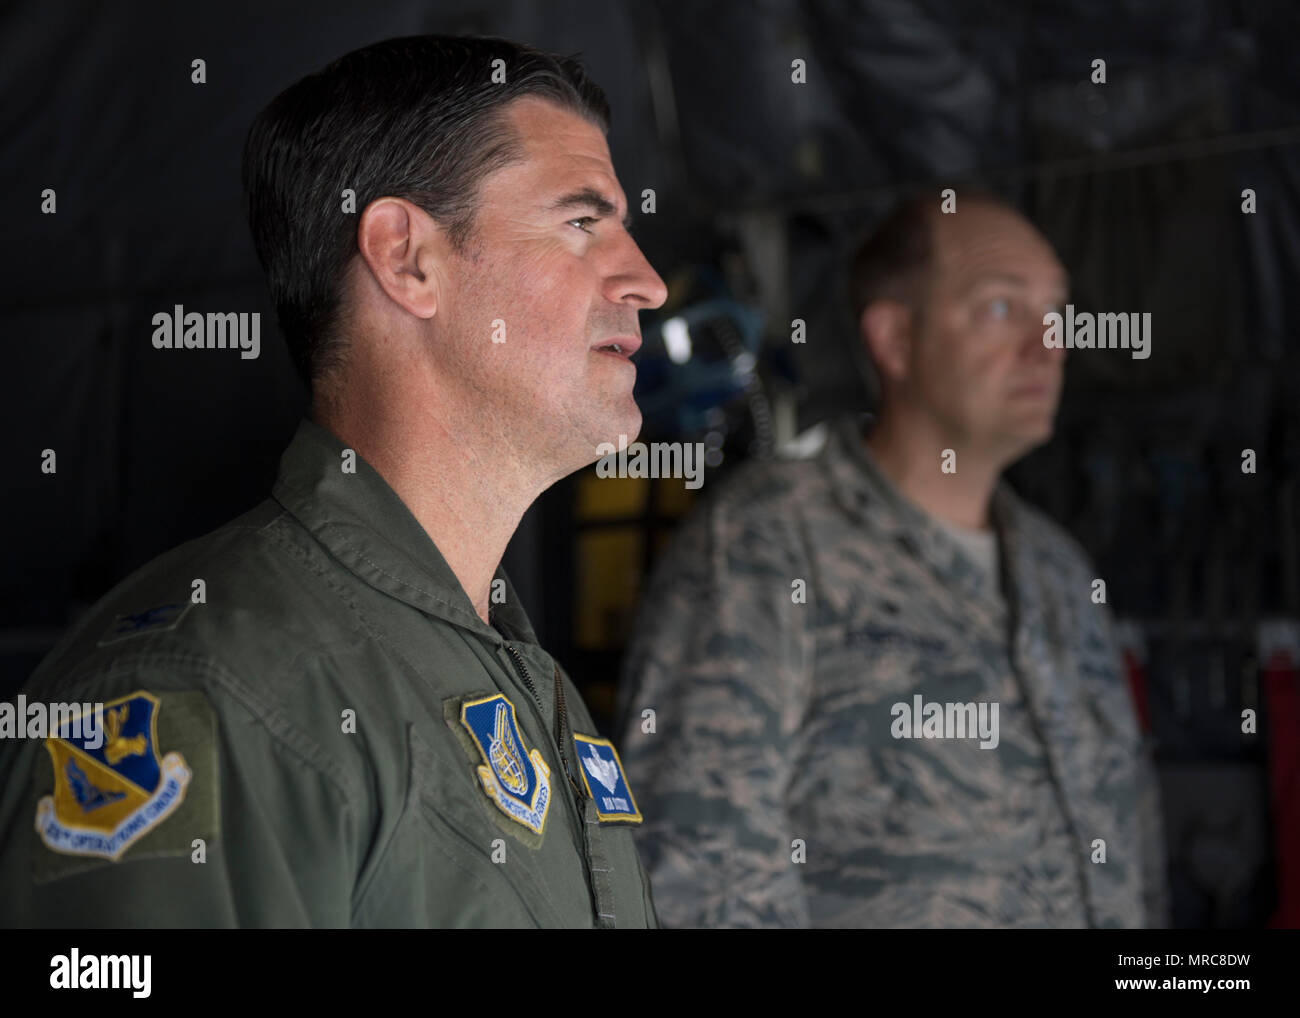 Col. Robert L. Dotson, 374th Operations commander, receives a briefing before his fine flight, June 2, 2017, at Yokota Air Base, Japan. Fini flights follow an Air Force tradition where aircrew members are met and hosed down with water by their group comrades. (U.S. Air Force photo by Airman 1st Class Juan Torres) Stock Photo